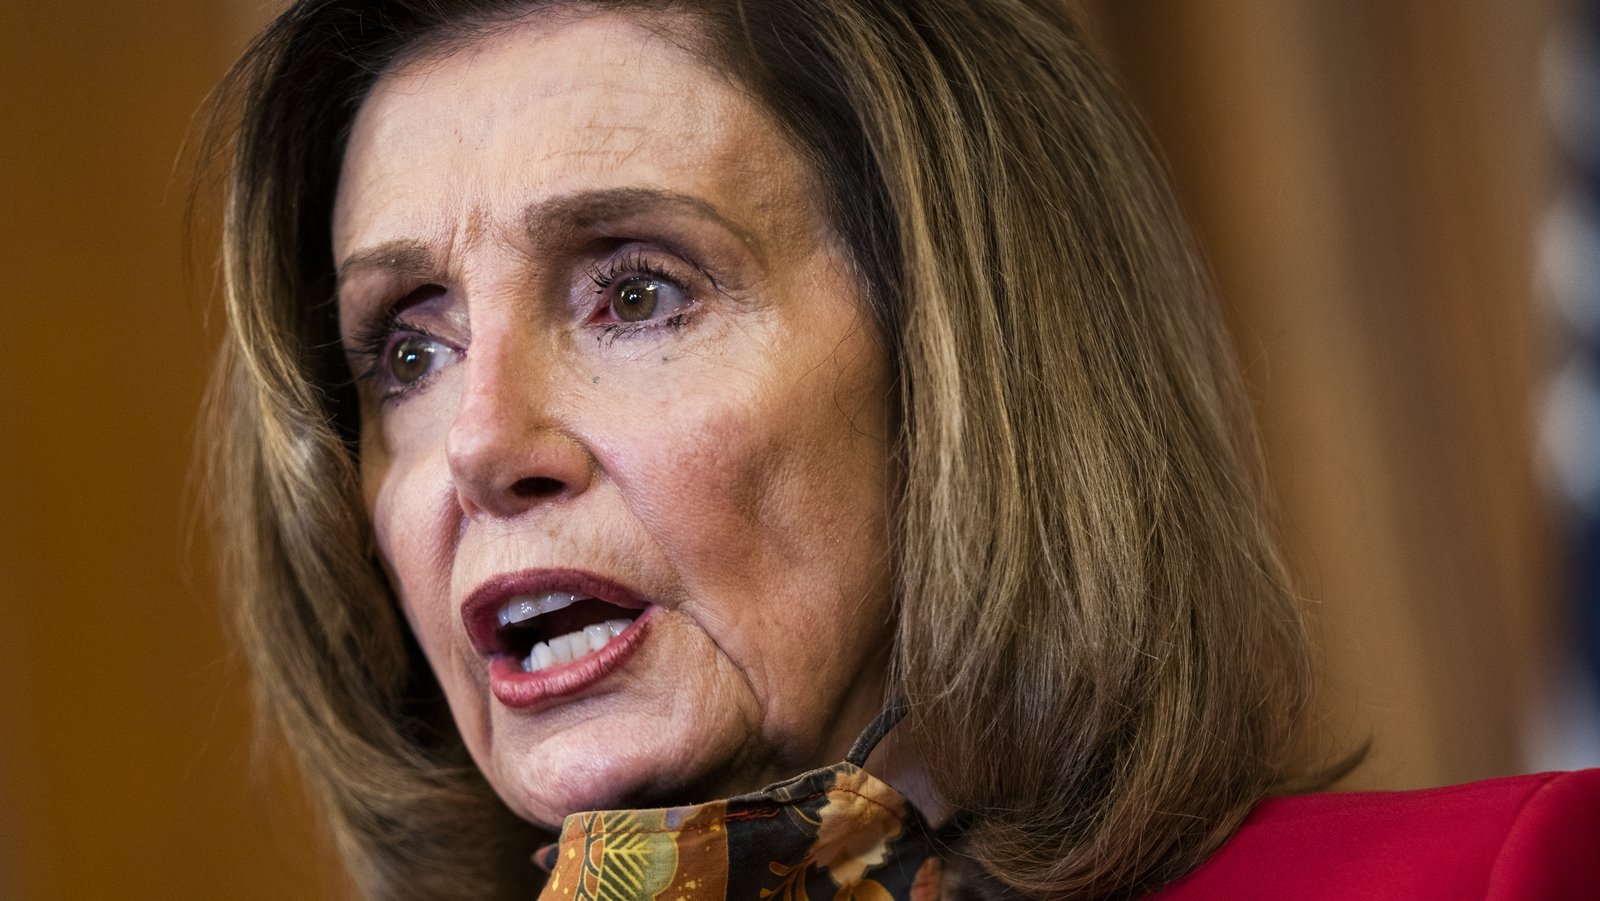 Rabbi assures Pelosi that there will be no strict boundaries

